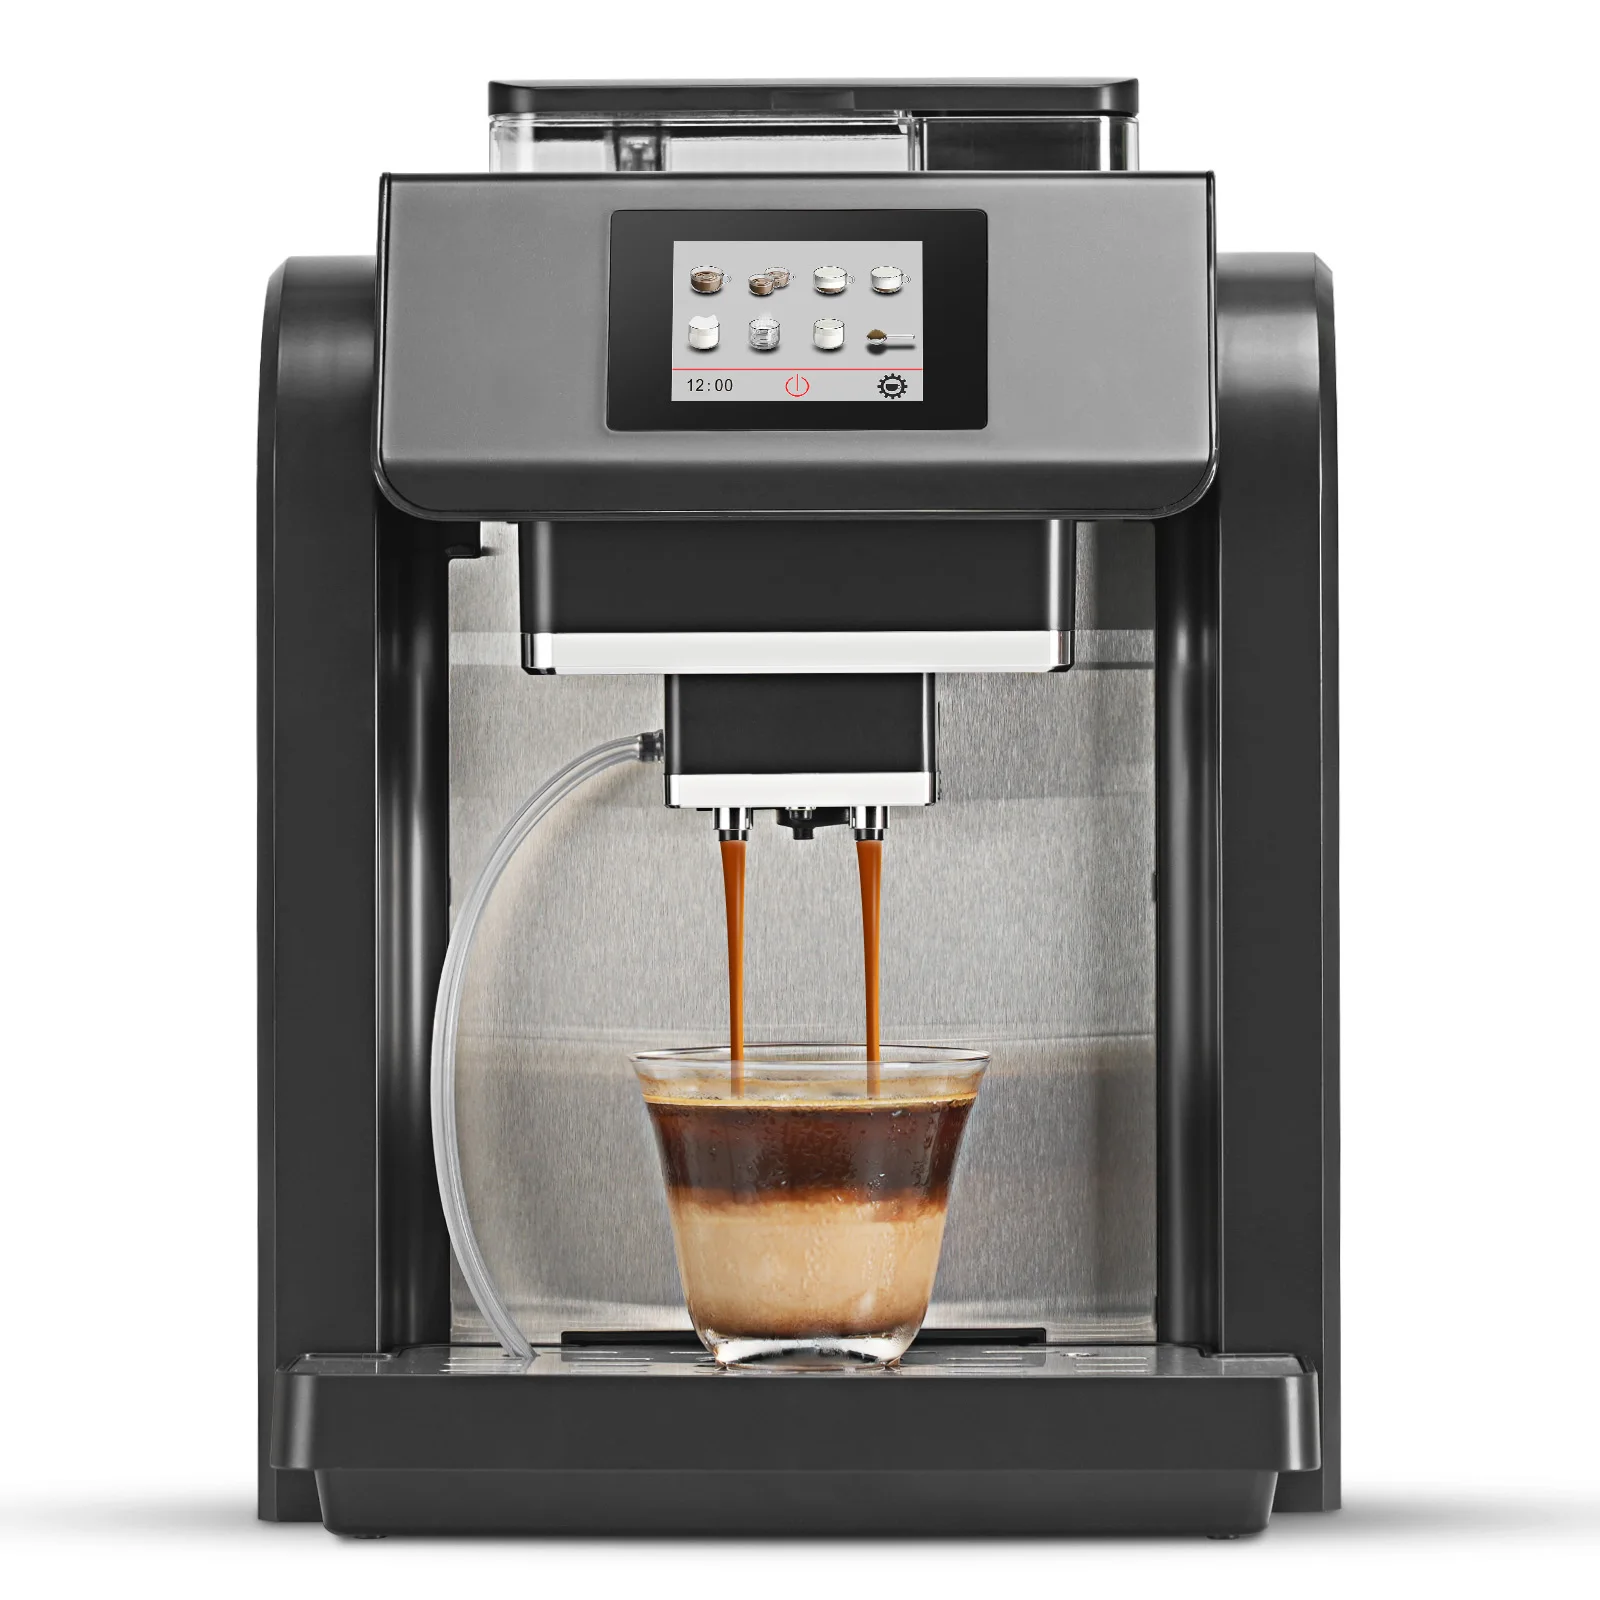 https://ae01.alicdn.com/kf/S905ecc6247964a06b6bdb5ef6d2cdb66T/Mcilpoog-ES317-Fully-Automatic-Espresso-Machine-Milk-Frother-Built-in-Grinder-Intuitive-Touch-Display-7-Coffee.jpg